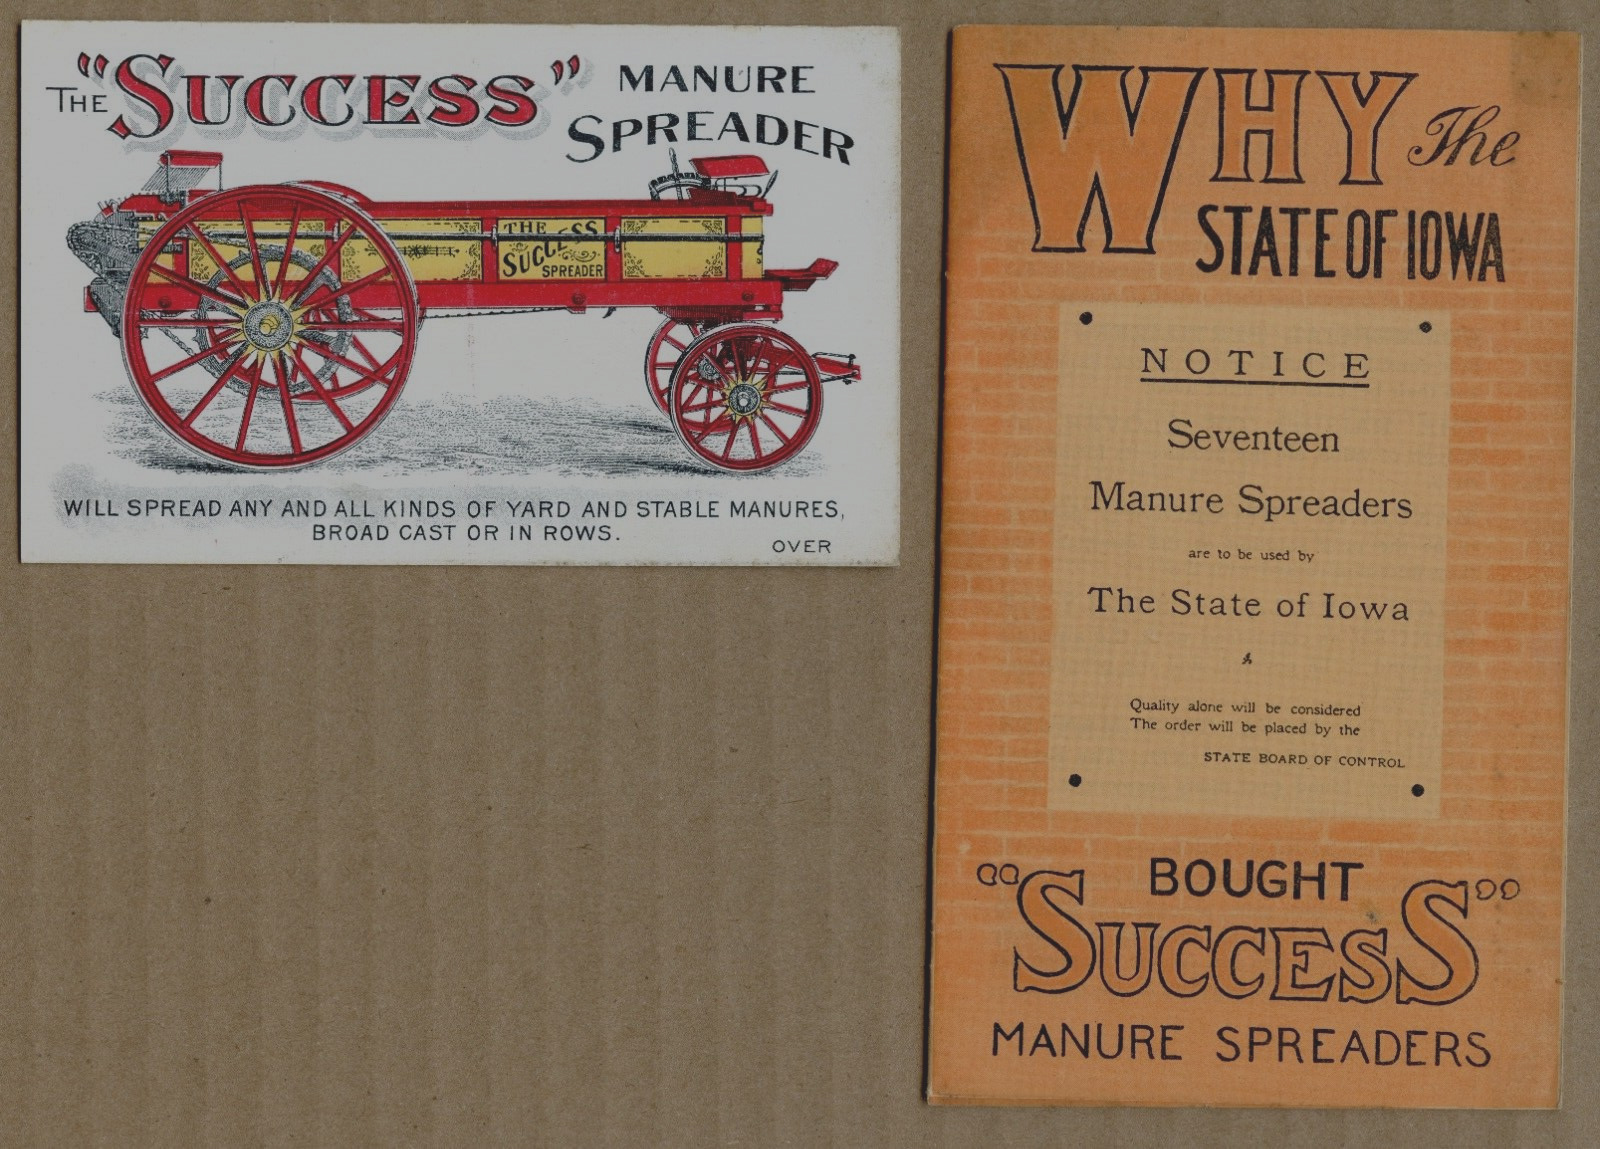 100+ yo Success Manure Spreader trade card & State of Iowa booklet - McGraw NY